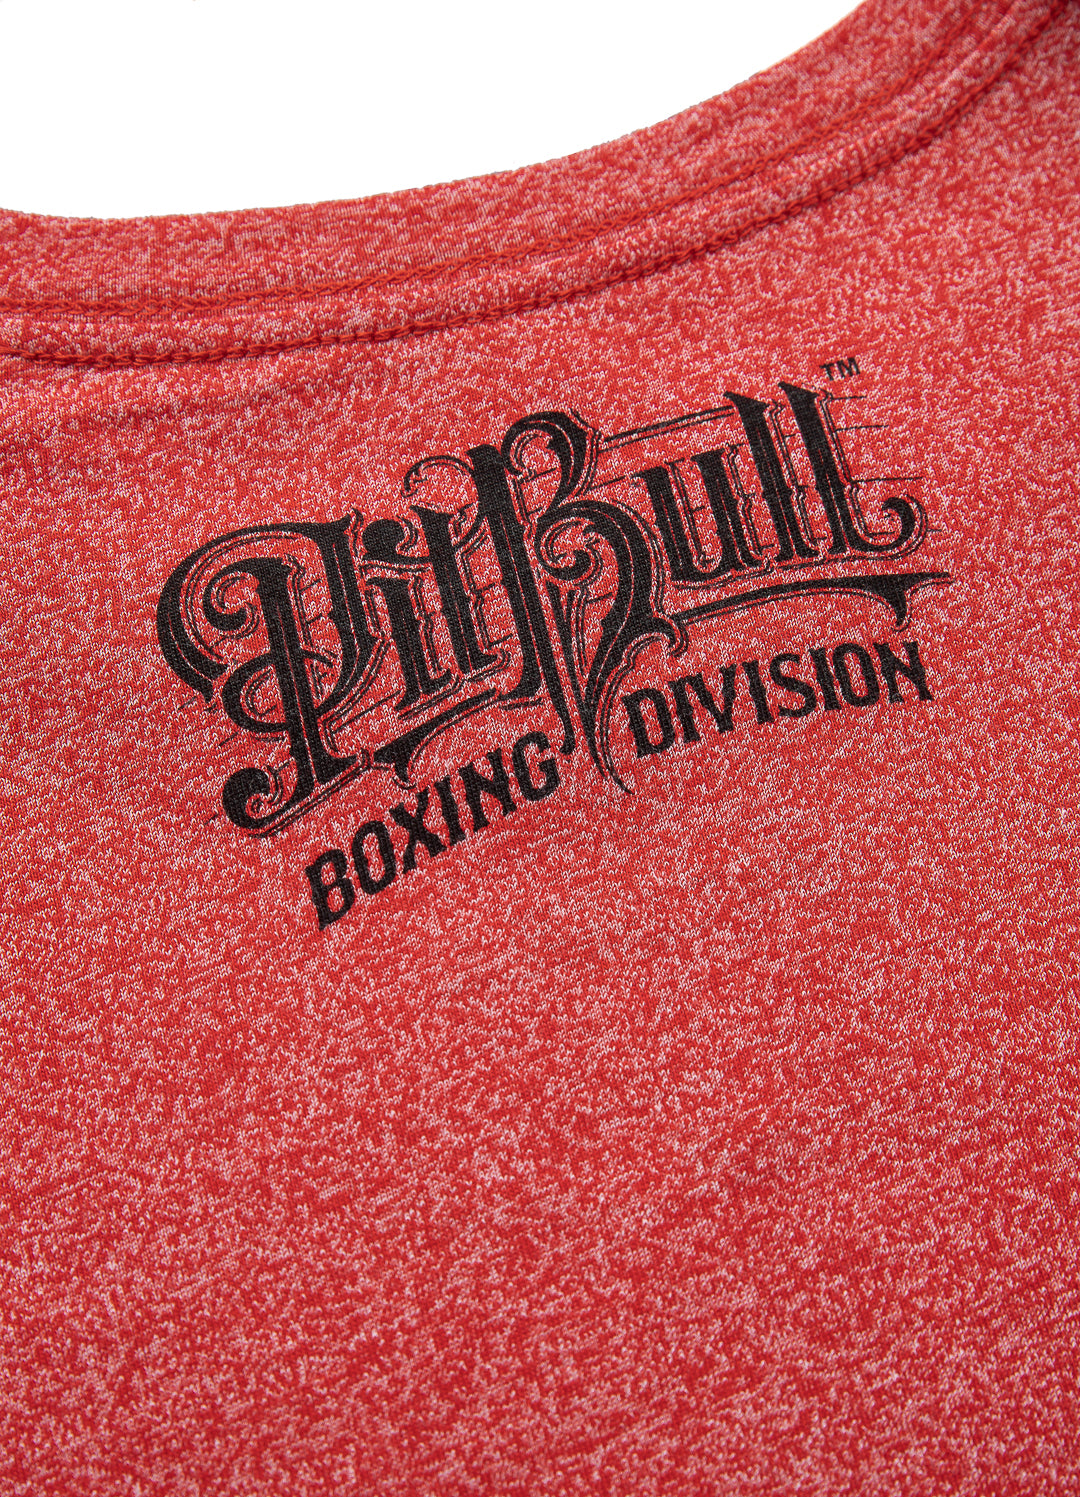 T-shirt VINTAGE BOXING Middleweight 190 Custom Fit Red MLG - Pitbull West Coast International Store 